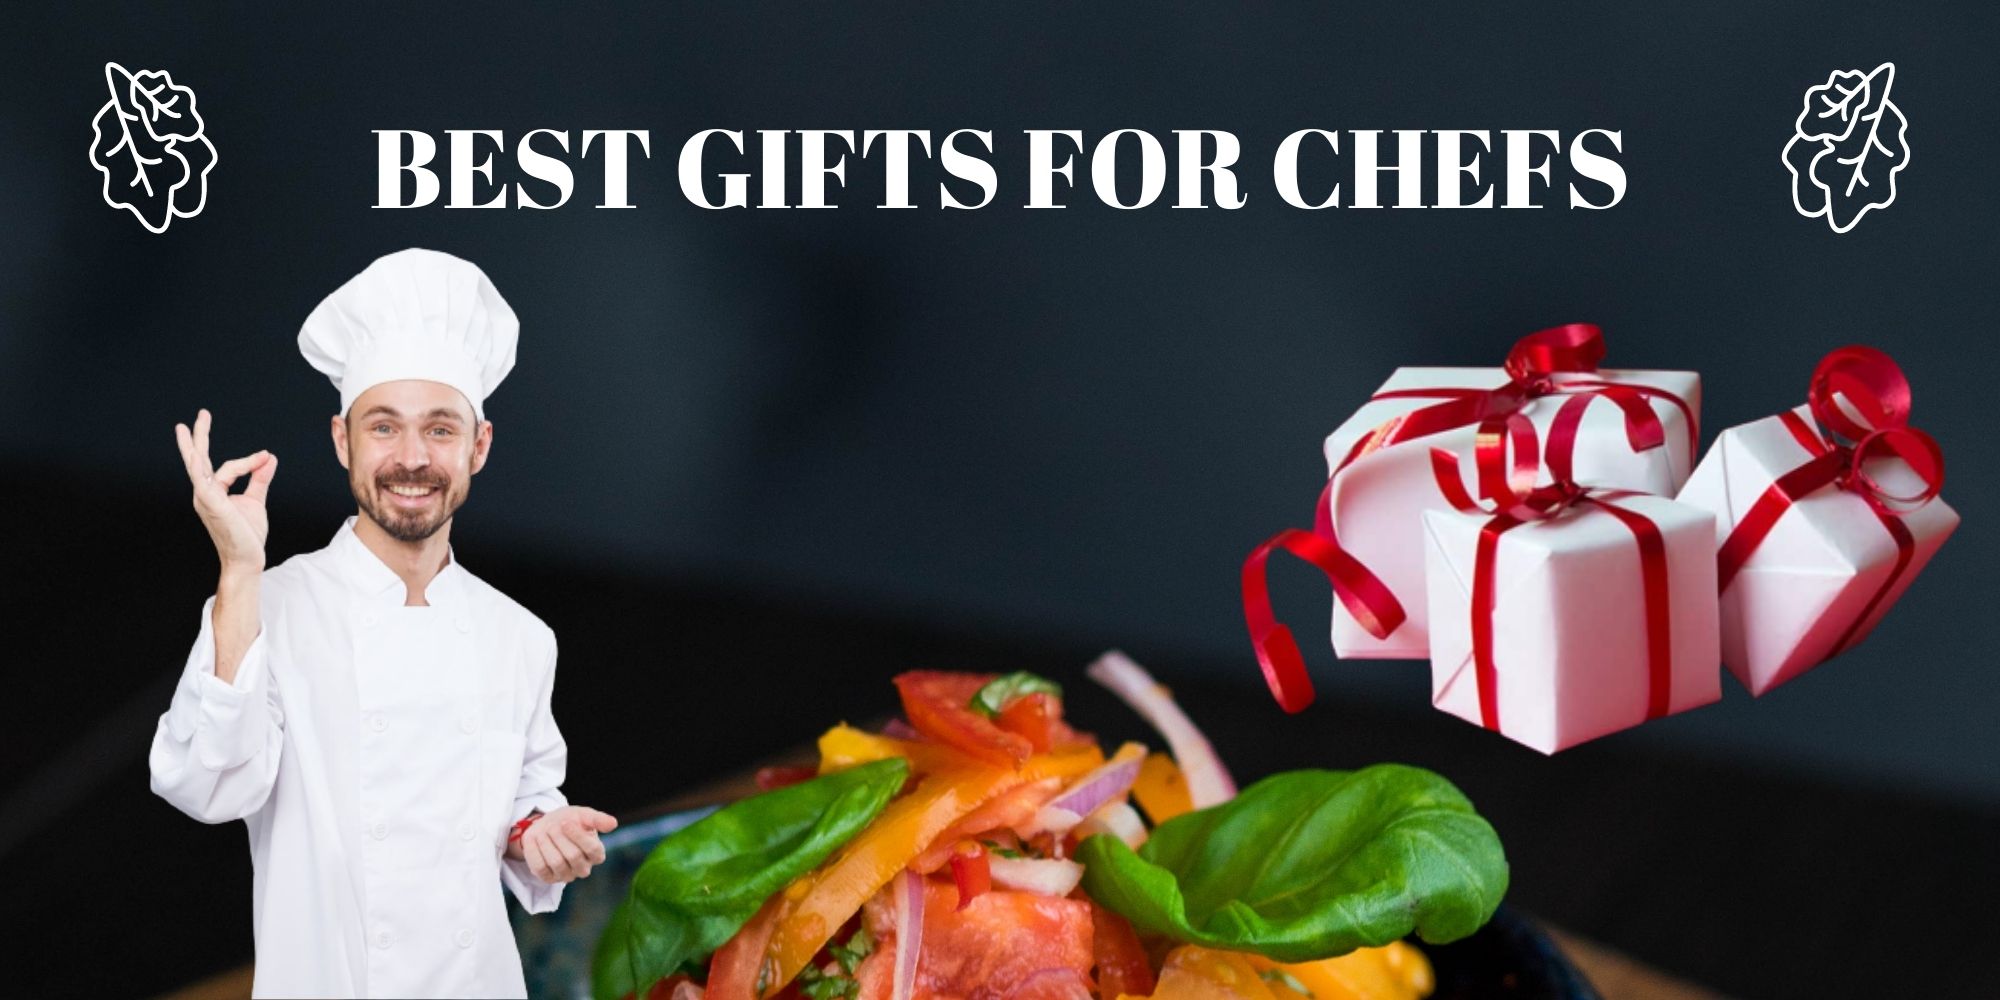 Best Gifts For Chefs